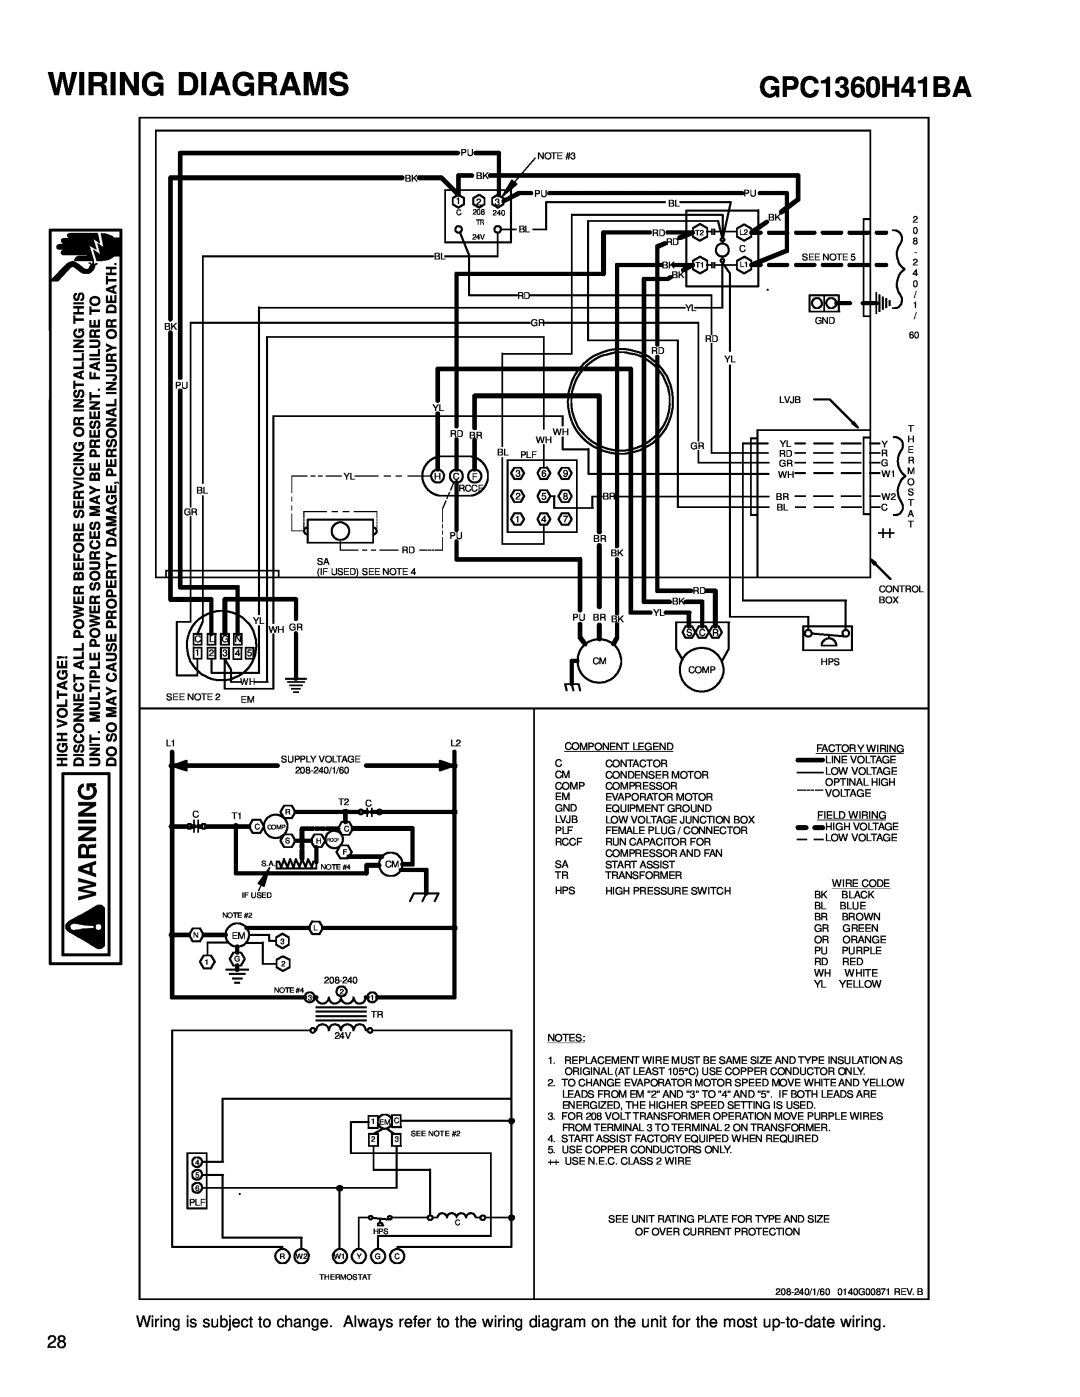 Goodmans GPC 13 SEER R-410A, GPC1324H41A service manual GPC1360H41BA, Wiring Diagrams, High Warning Unit. Do 